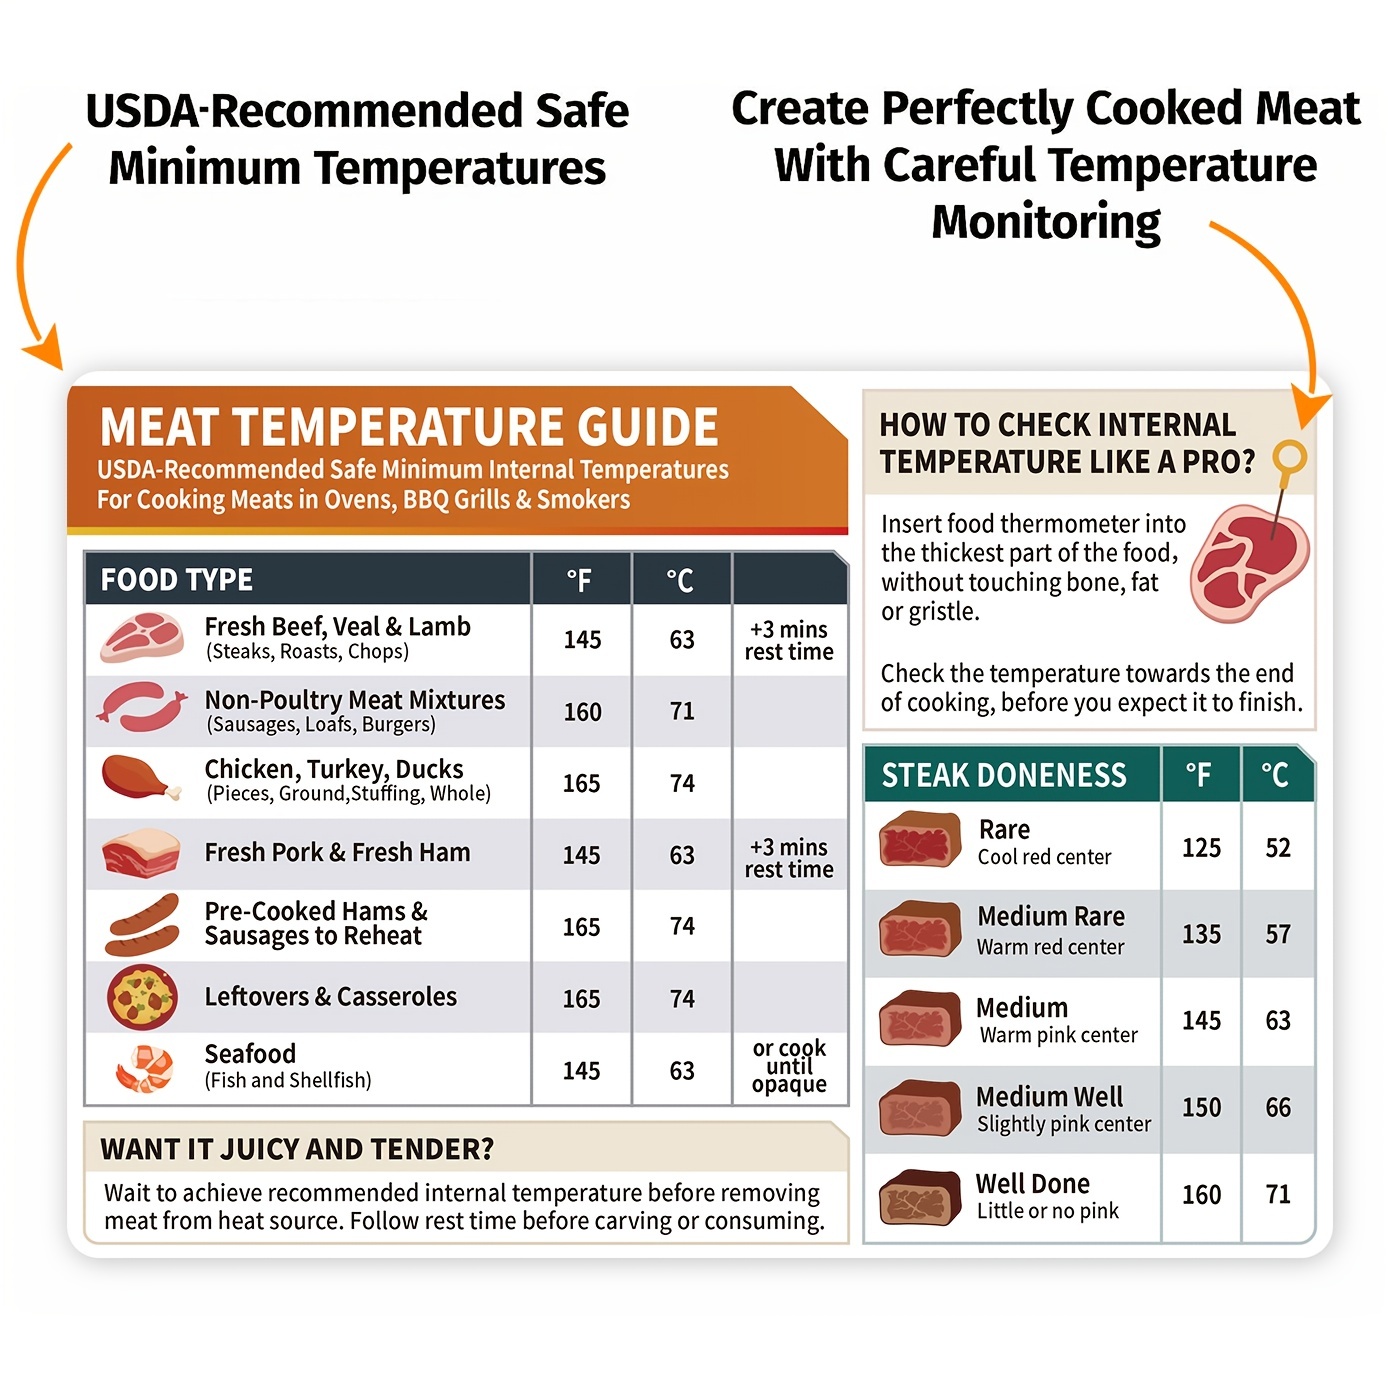 Meat Temperature Chart - Crafted Cook